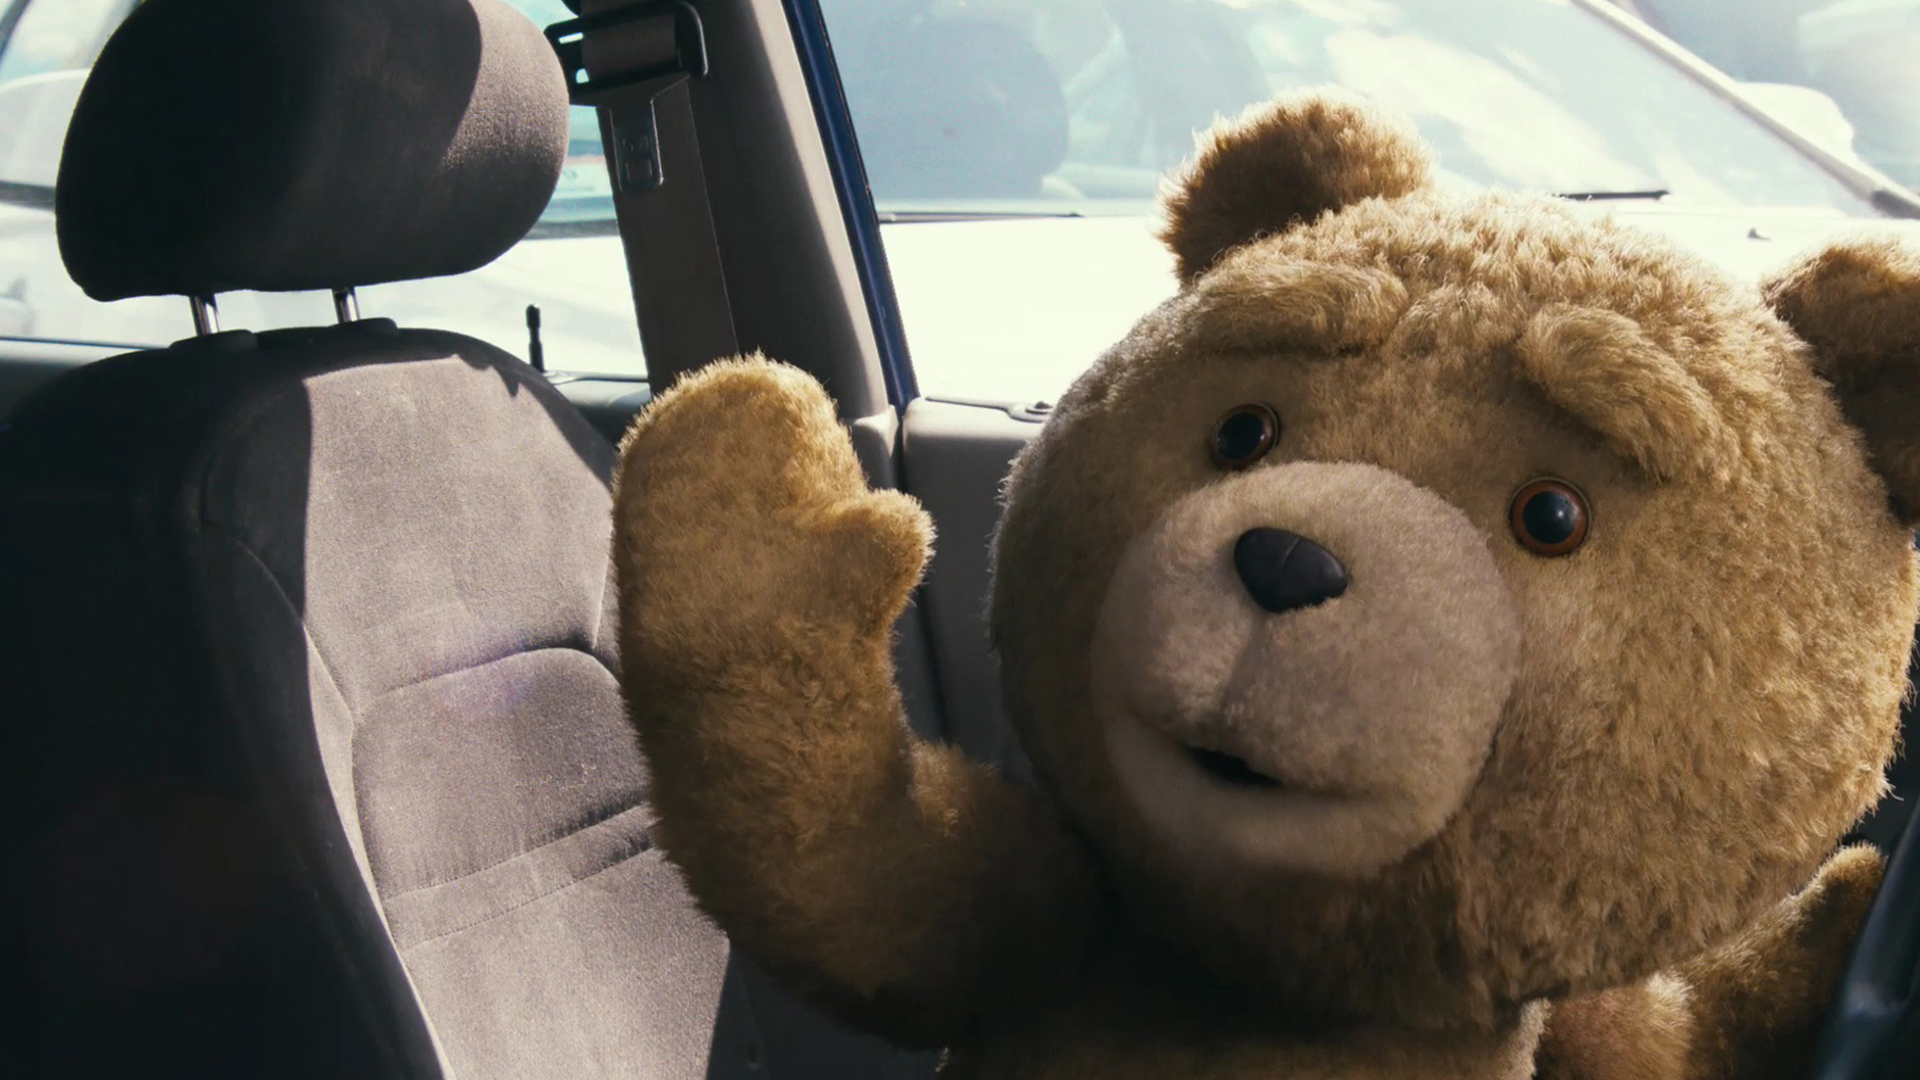 Movie Ted HD Wallpaper | Background Image